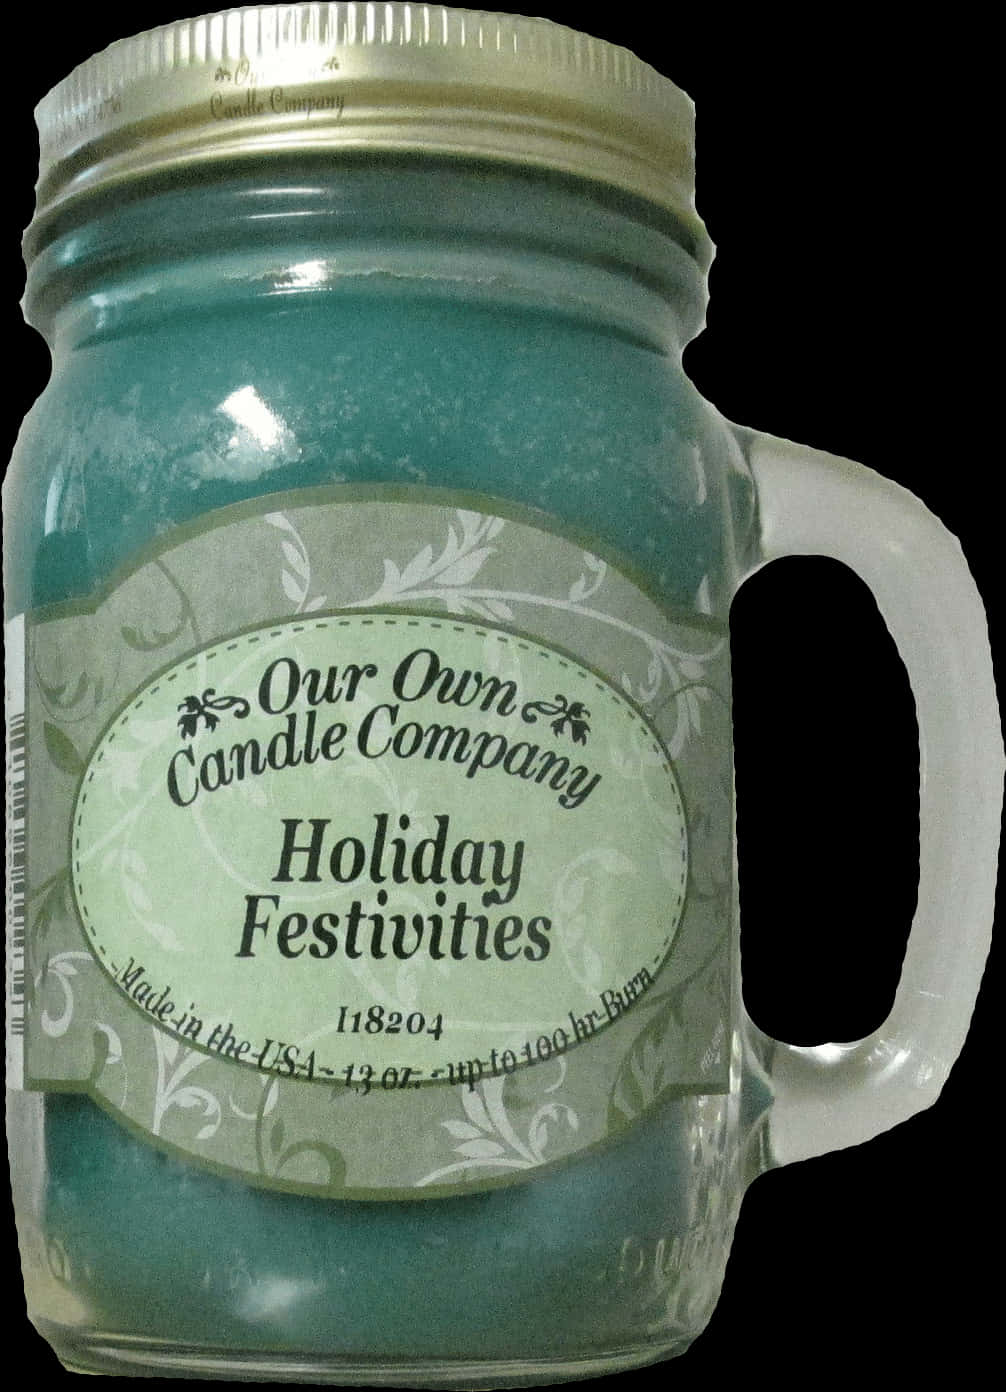 Holiday Festivities Candle Jar PNG image